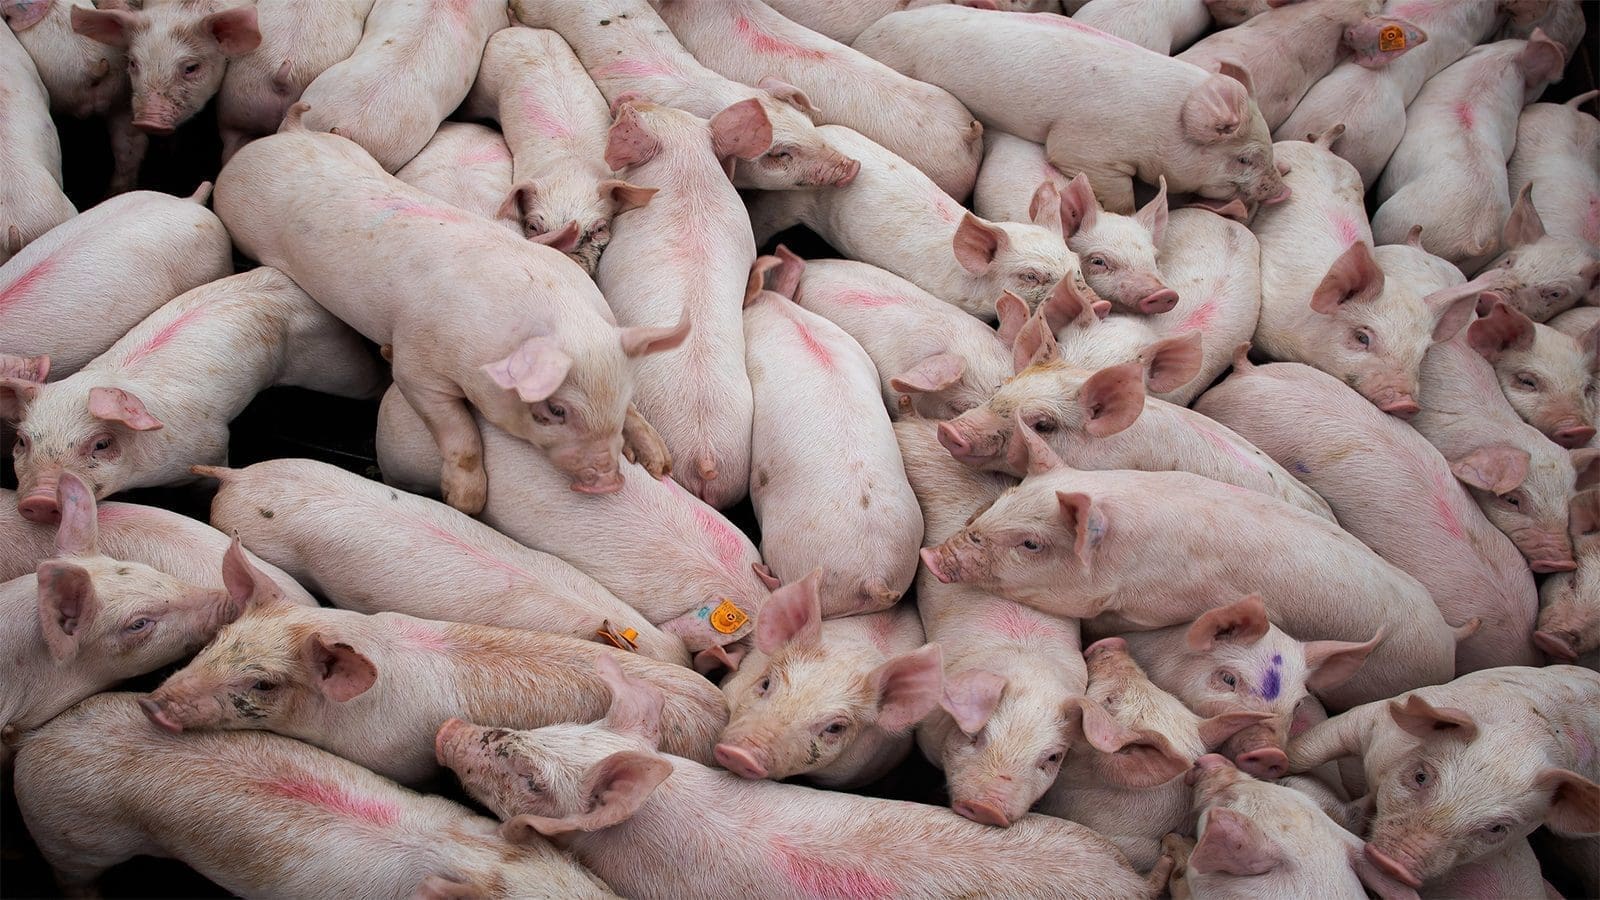 SUISAG teams up with Cloudfarms to ramp up traceability in pig supply chains